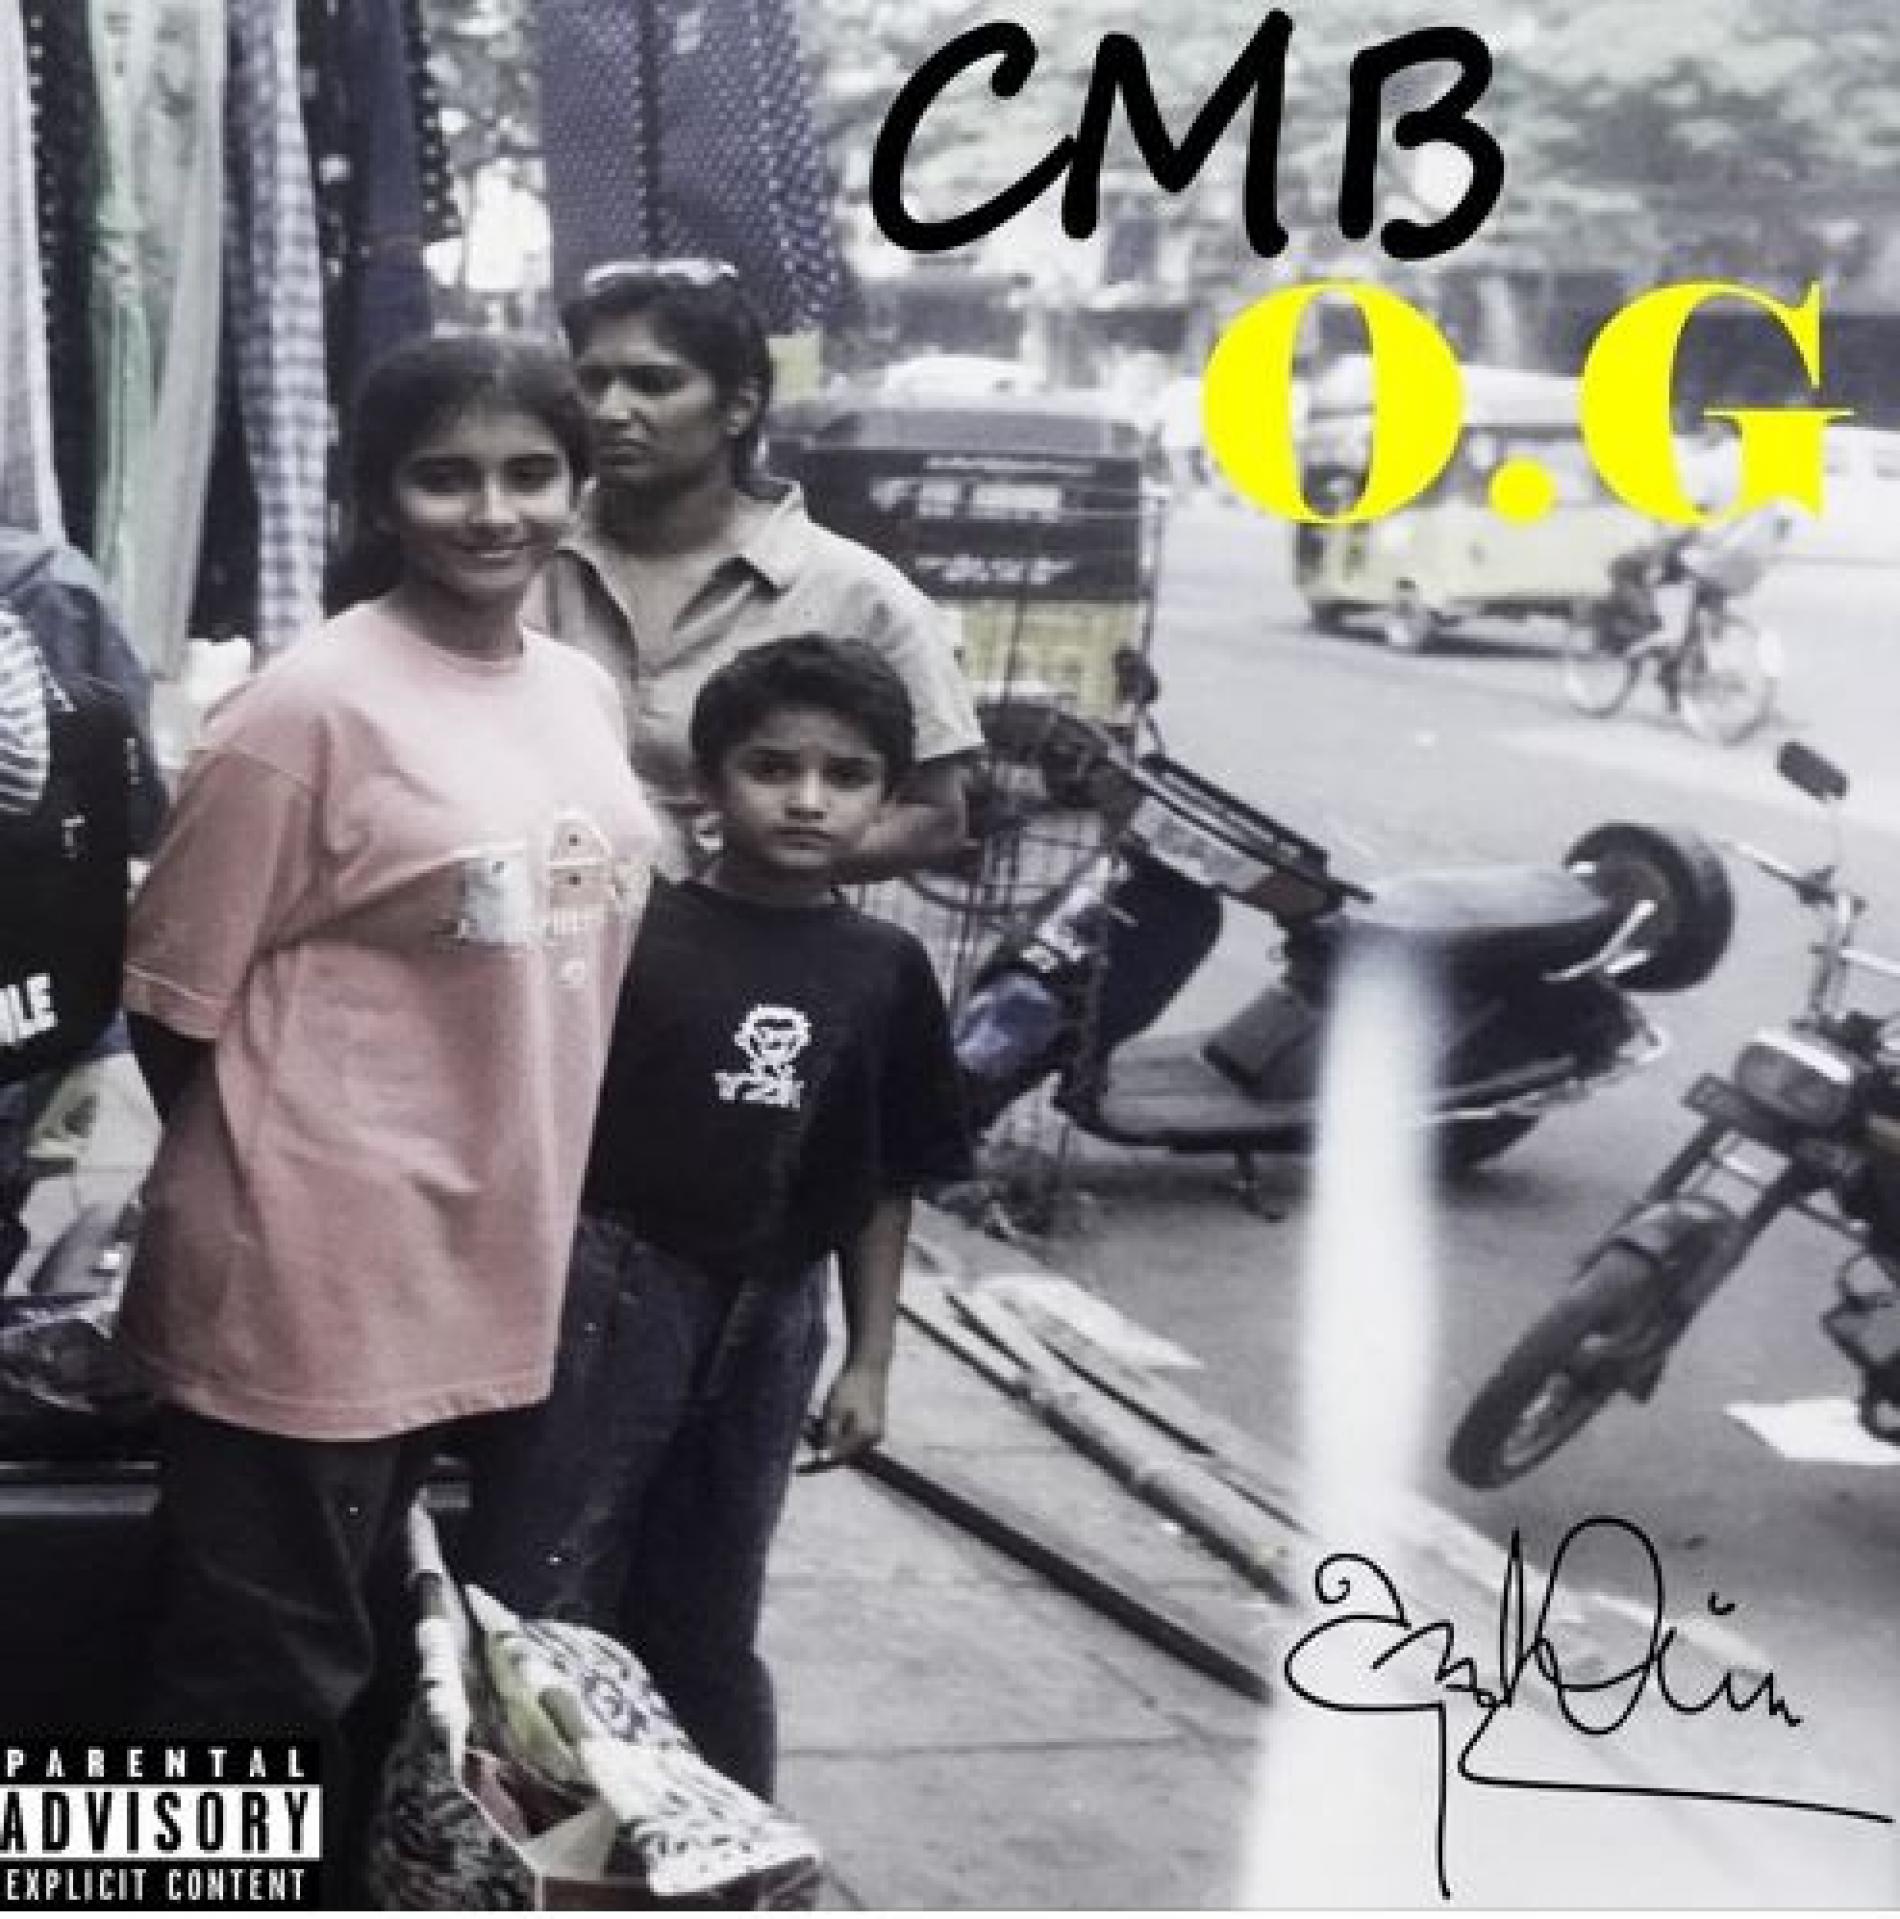 Andie – CMB O.G (The EP)